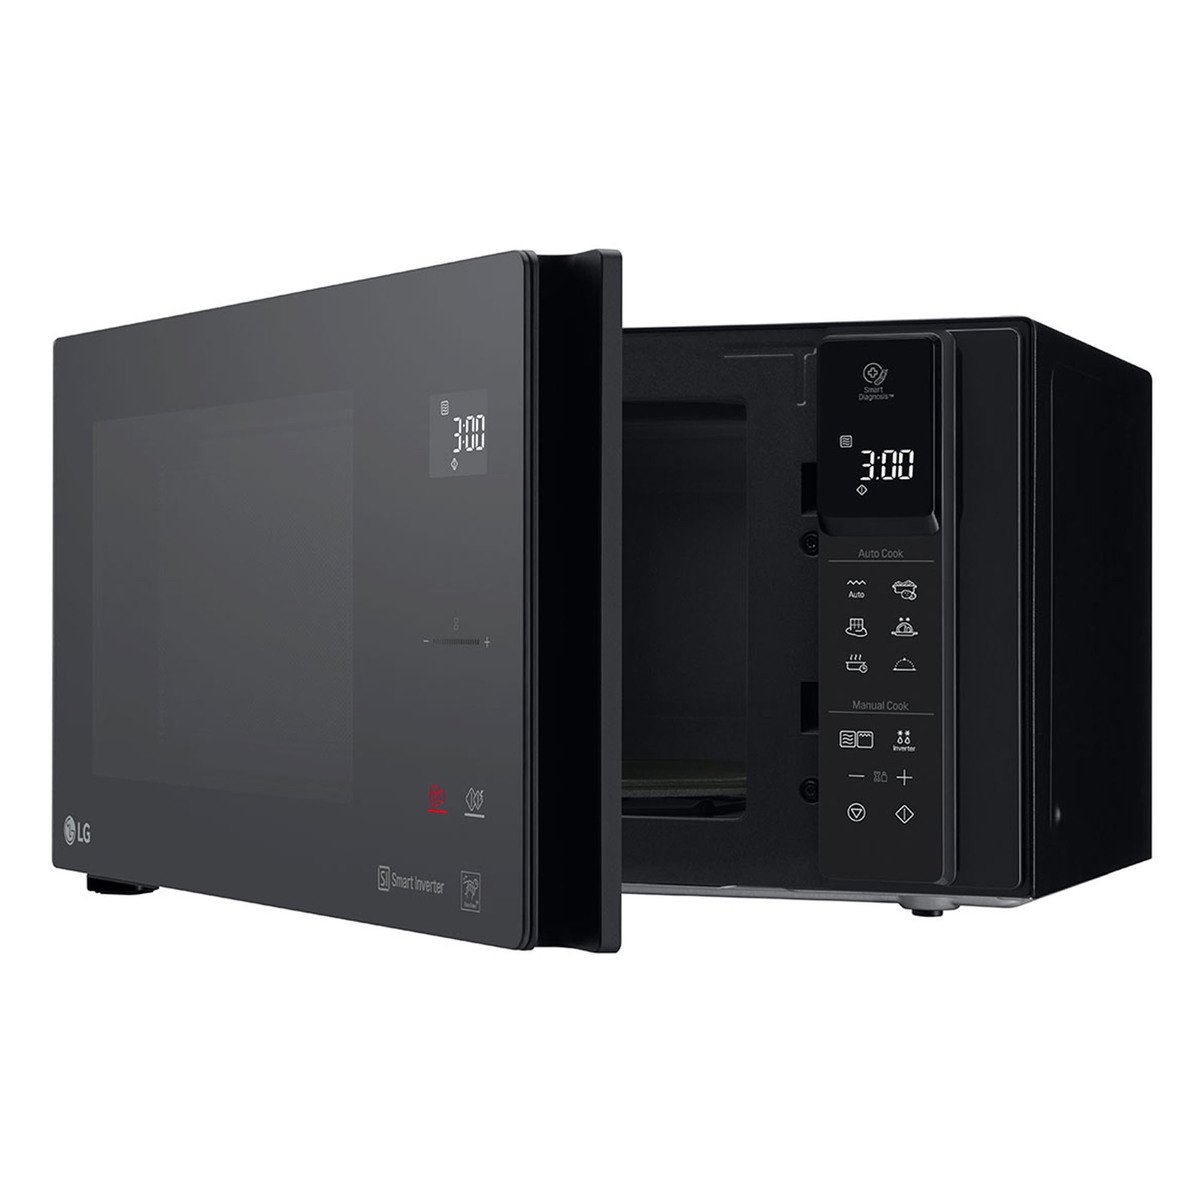 LG Mircowave Oven With Grill MH6595DIS 25 Ltr